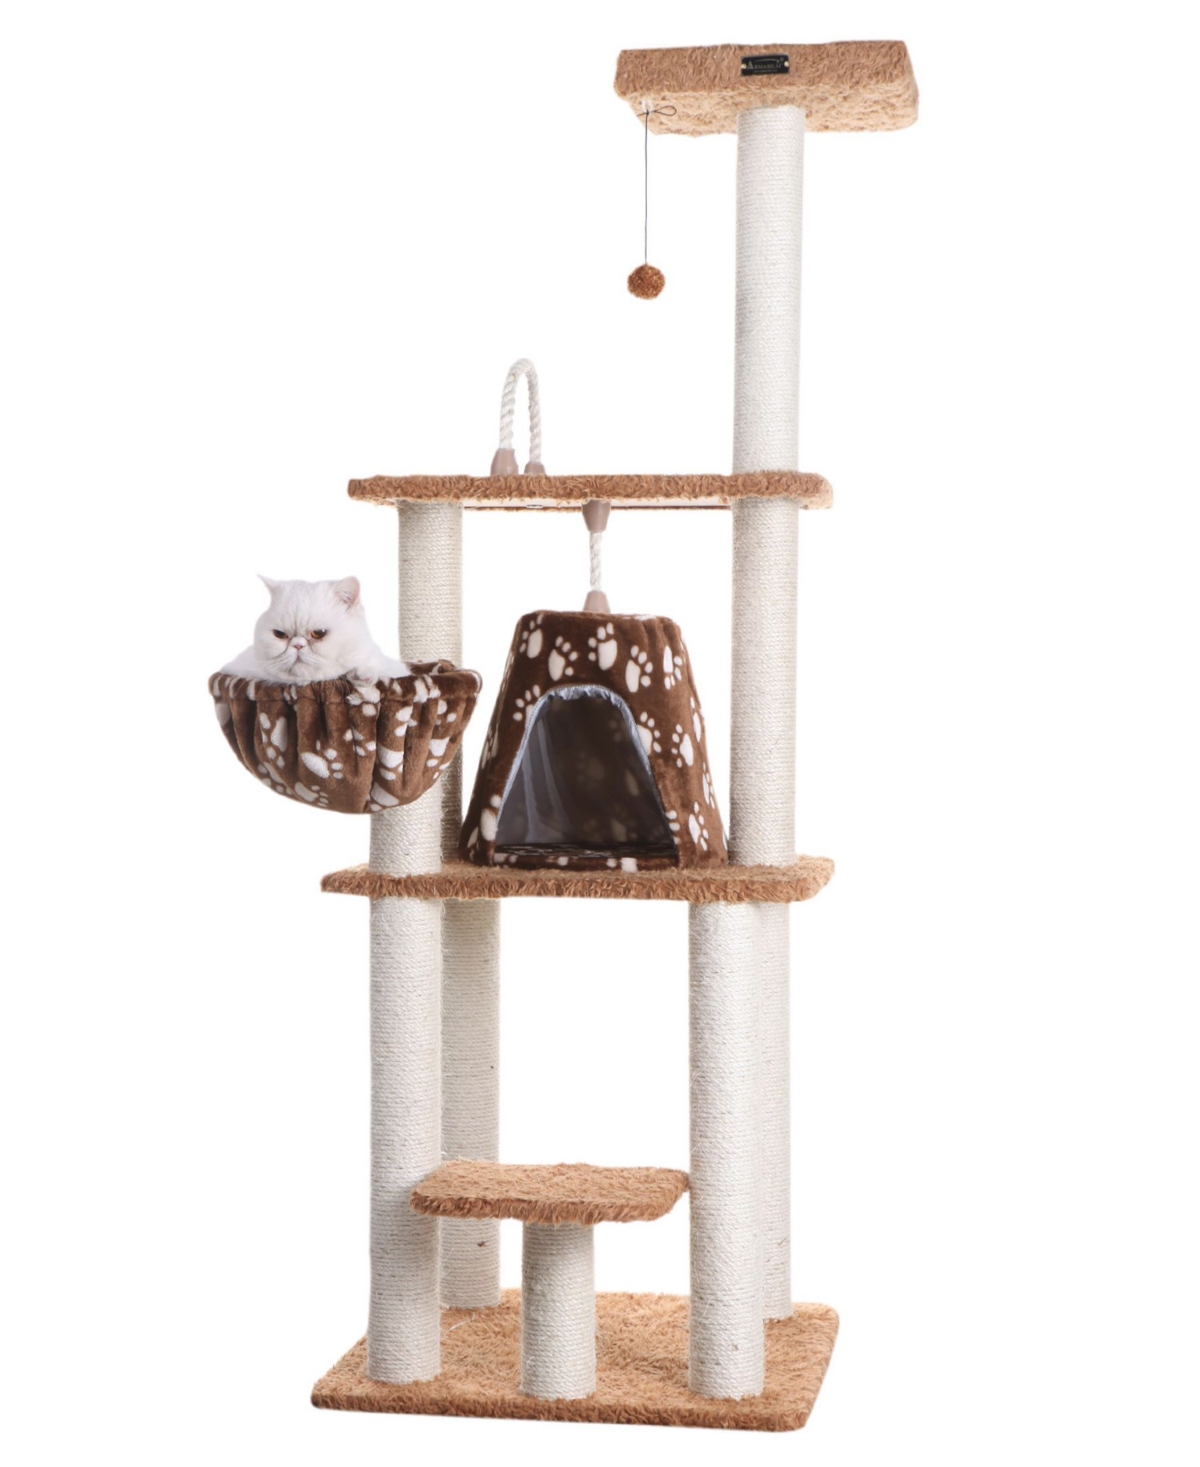 Real Wood Cat Furniture, Pressed Wood Kitty Tower - Ochre Brown